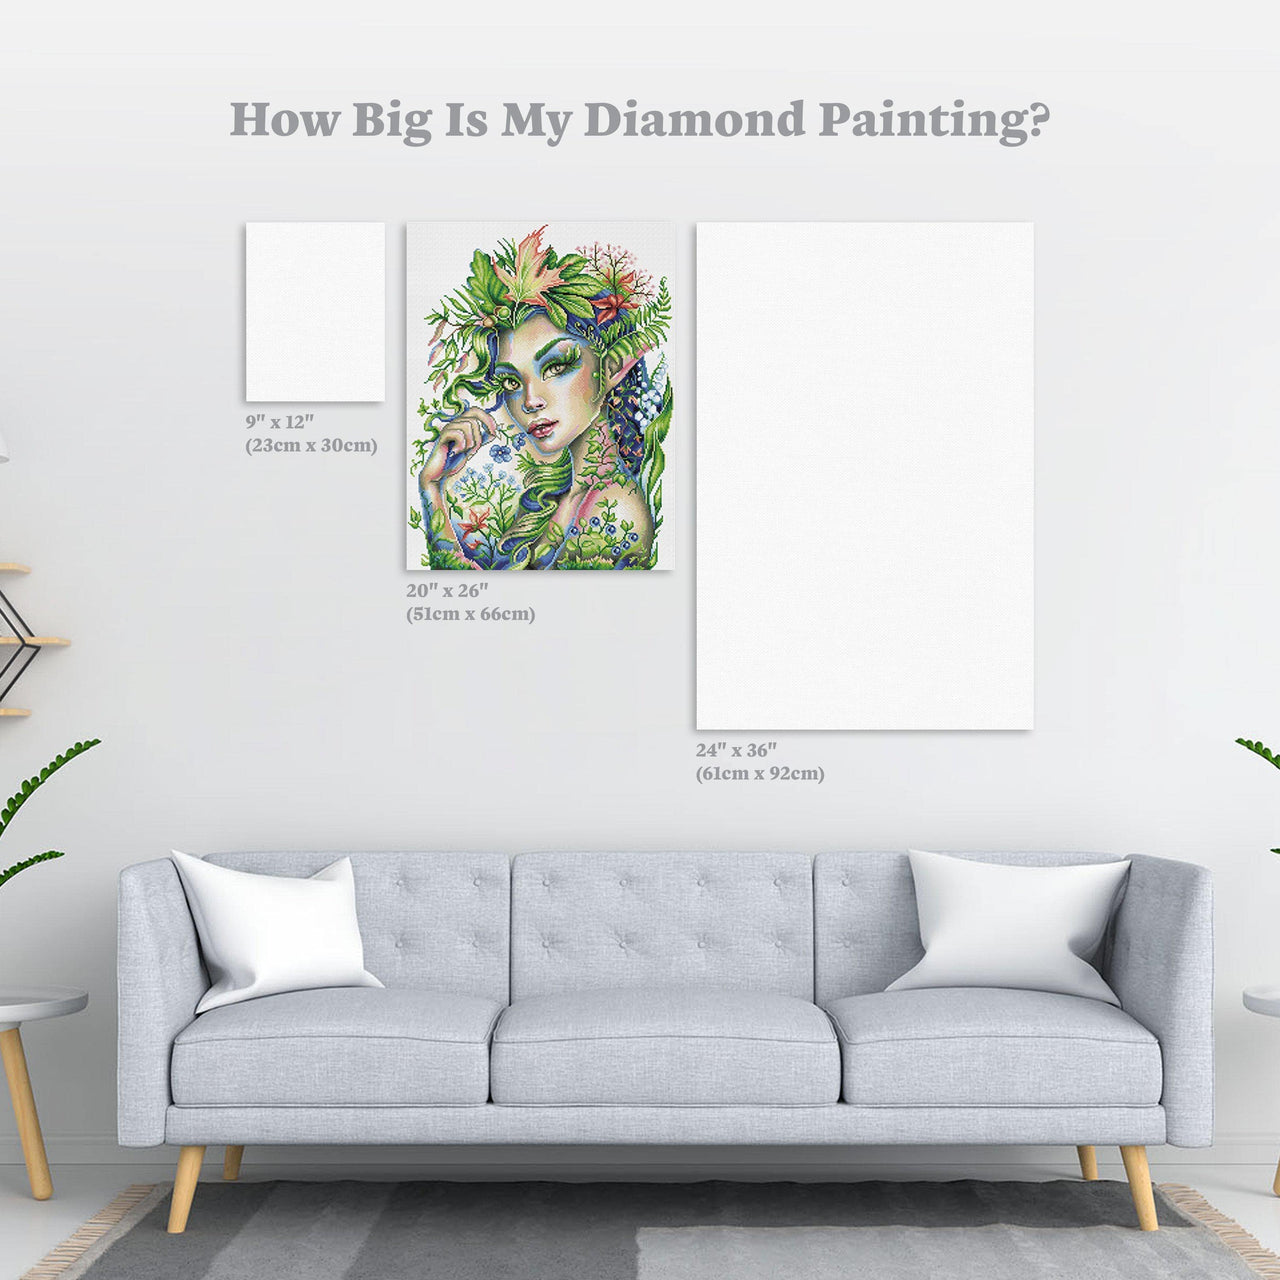 Diamond Painting Forest Sprite 20" x 26″ (51cm x 66cm) / Square with 56 Colors including 4 ABs / 52,461